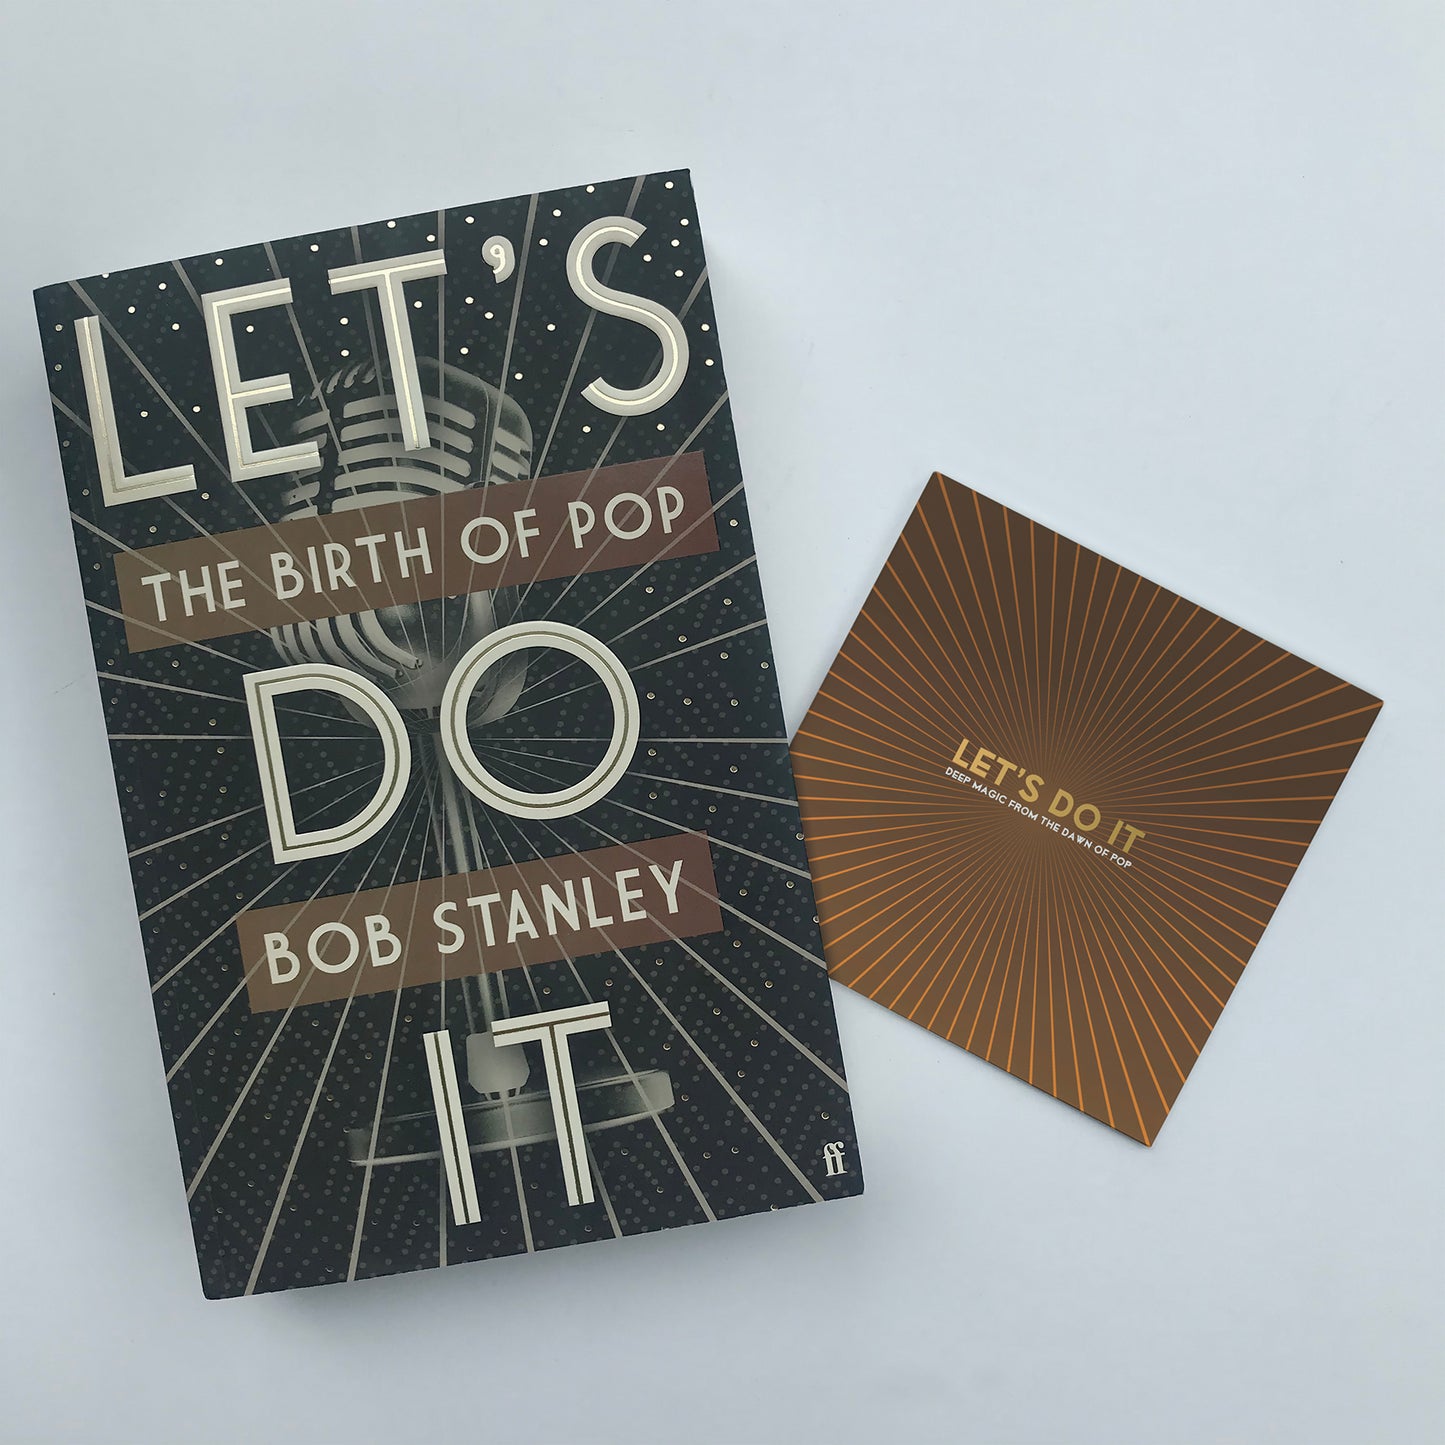 Let's Do It: The Birth Of Pop - Signed Book and CD